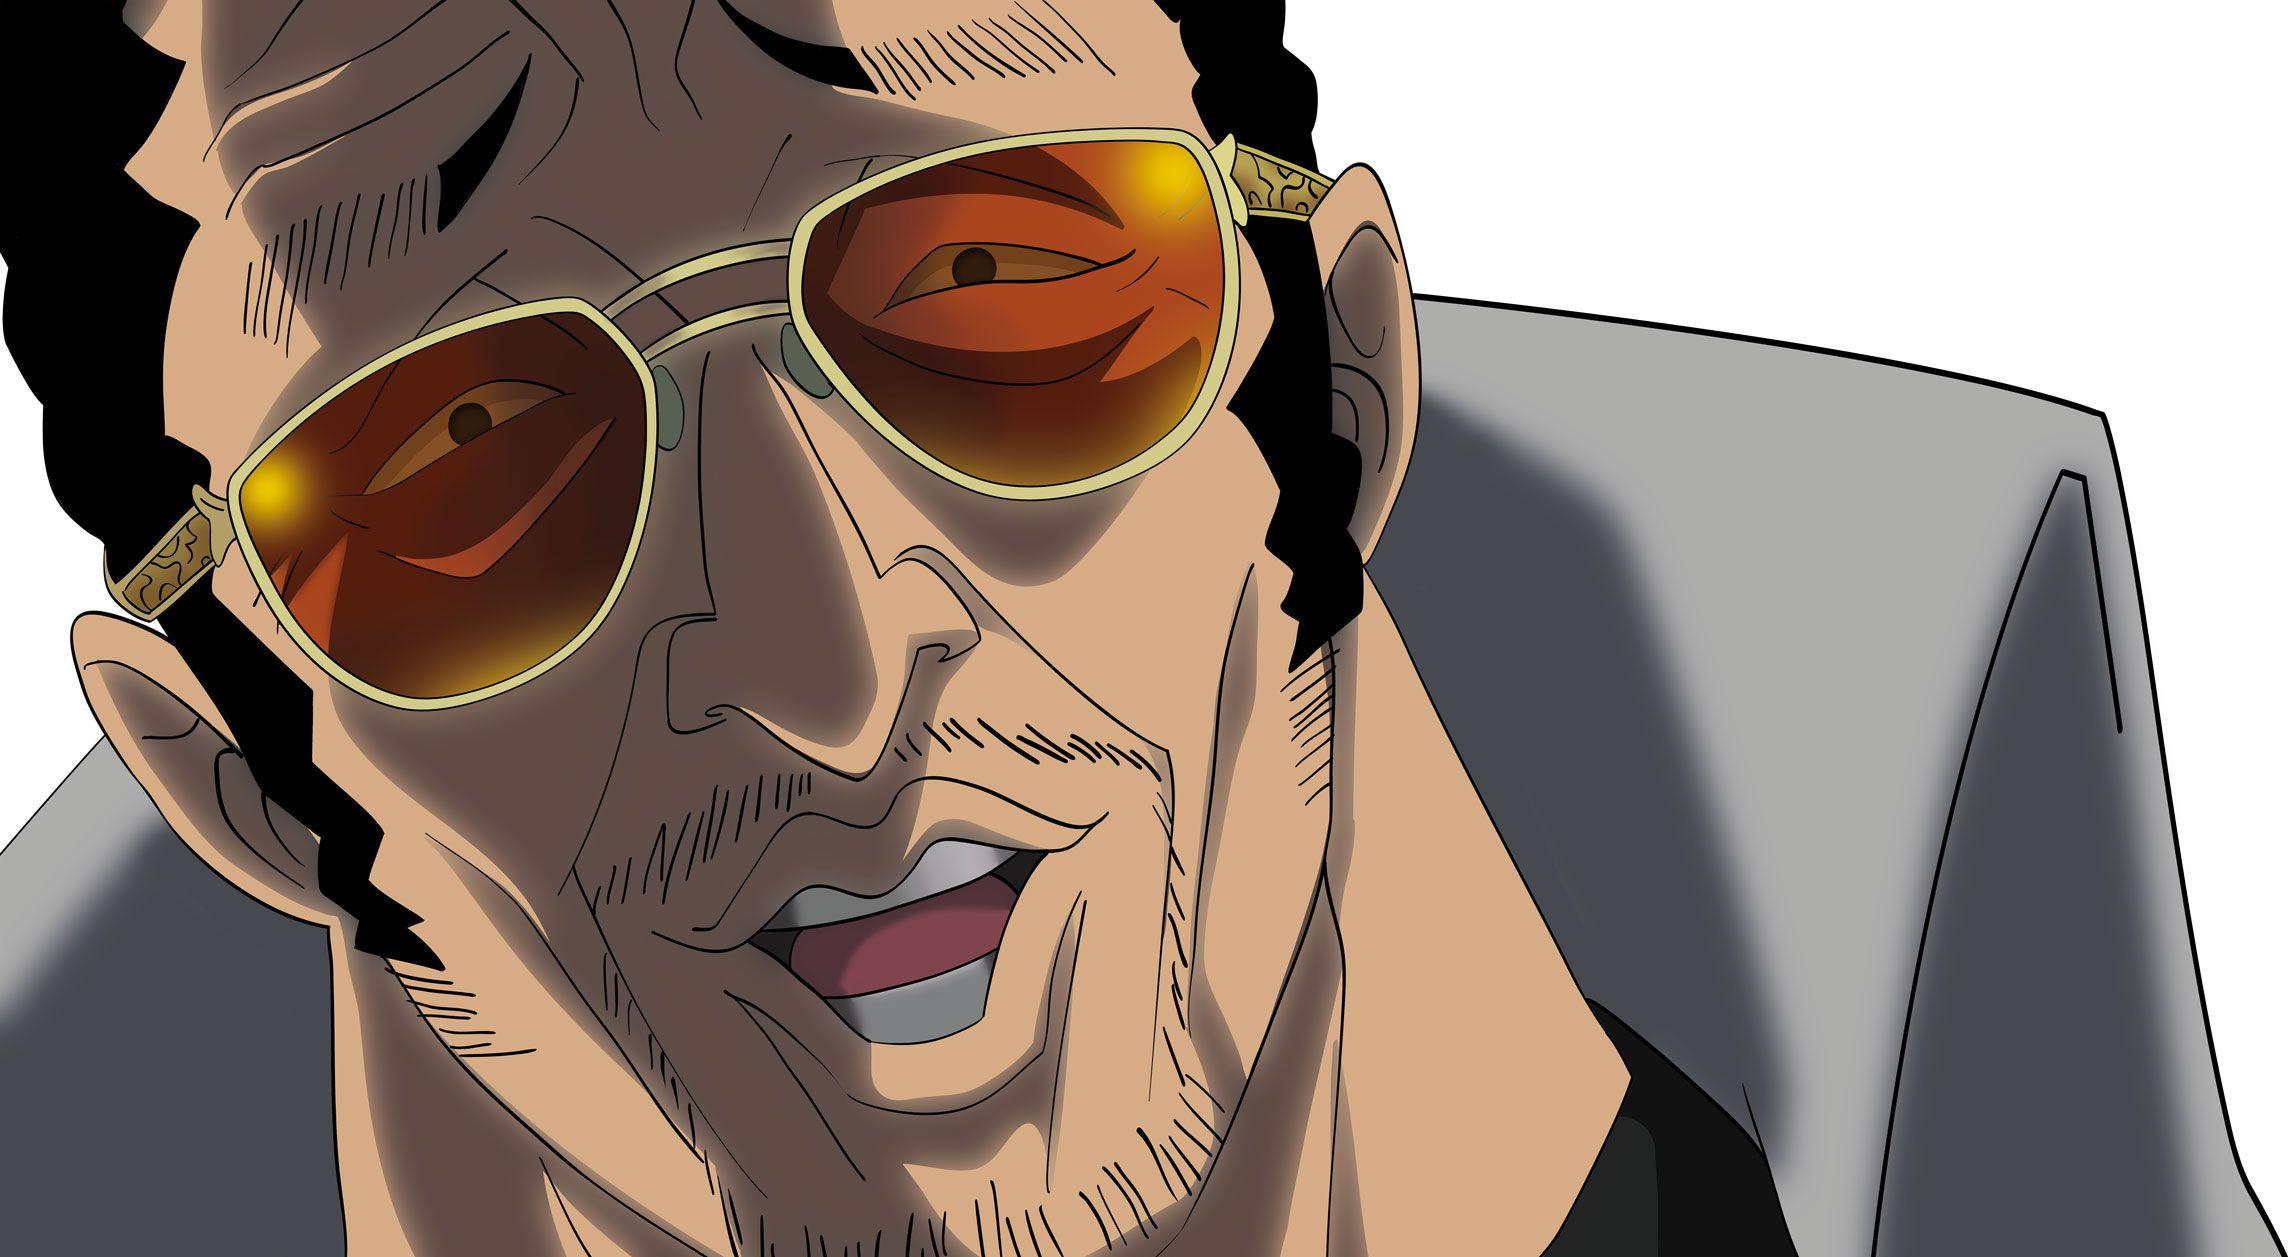 Kizaru One Piece Pictures to Pin.